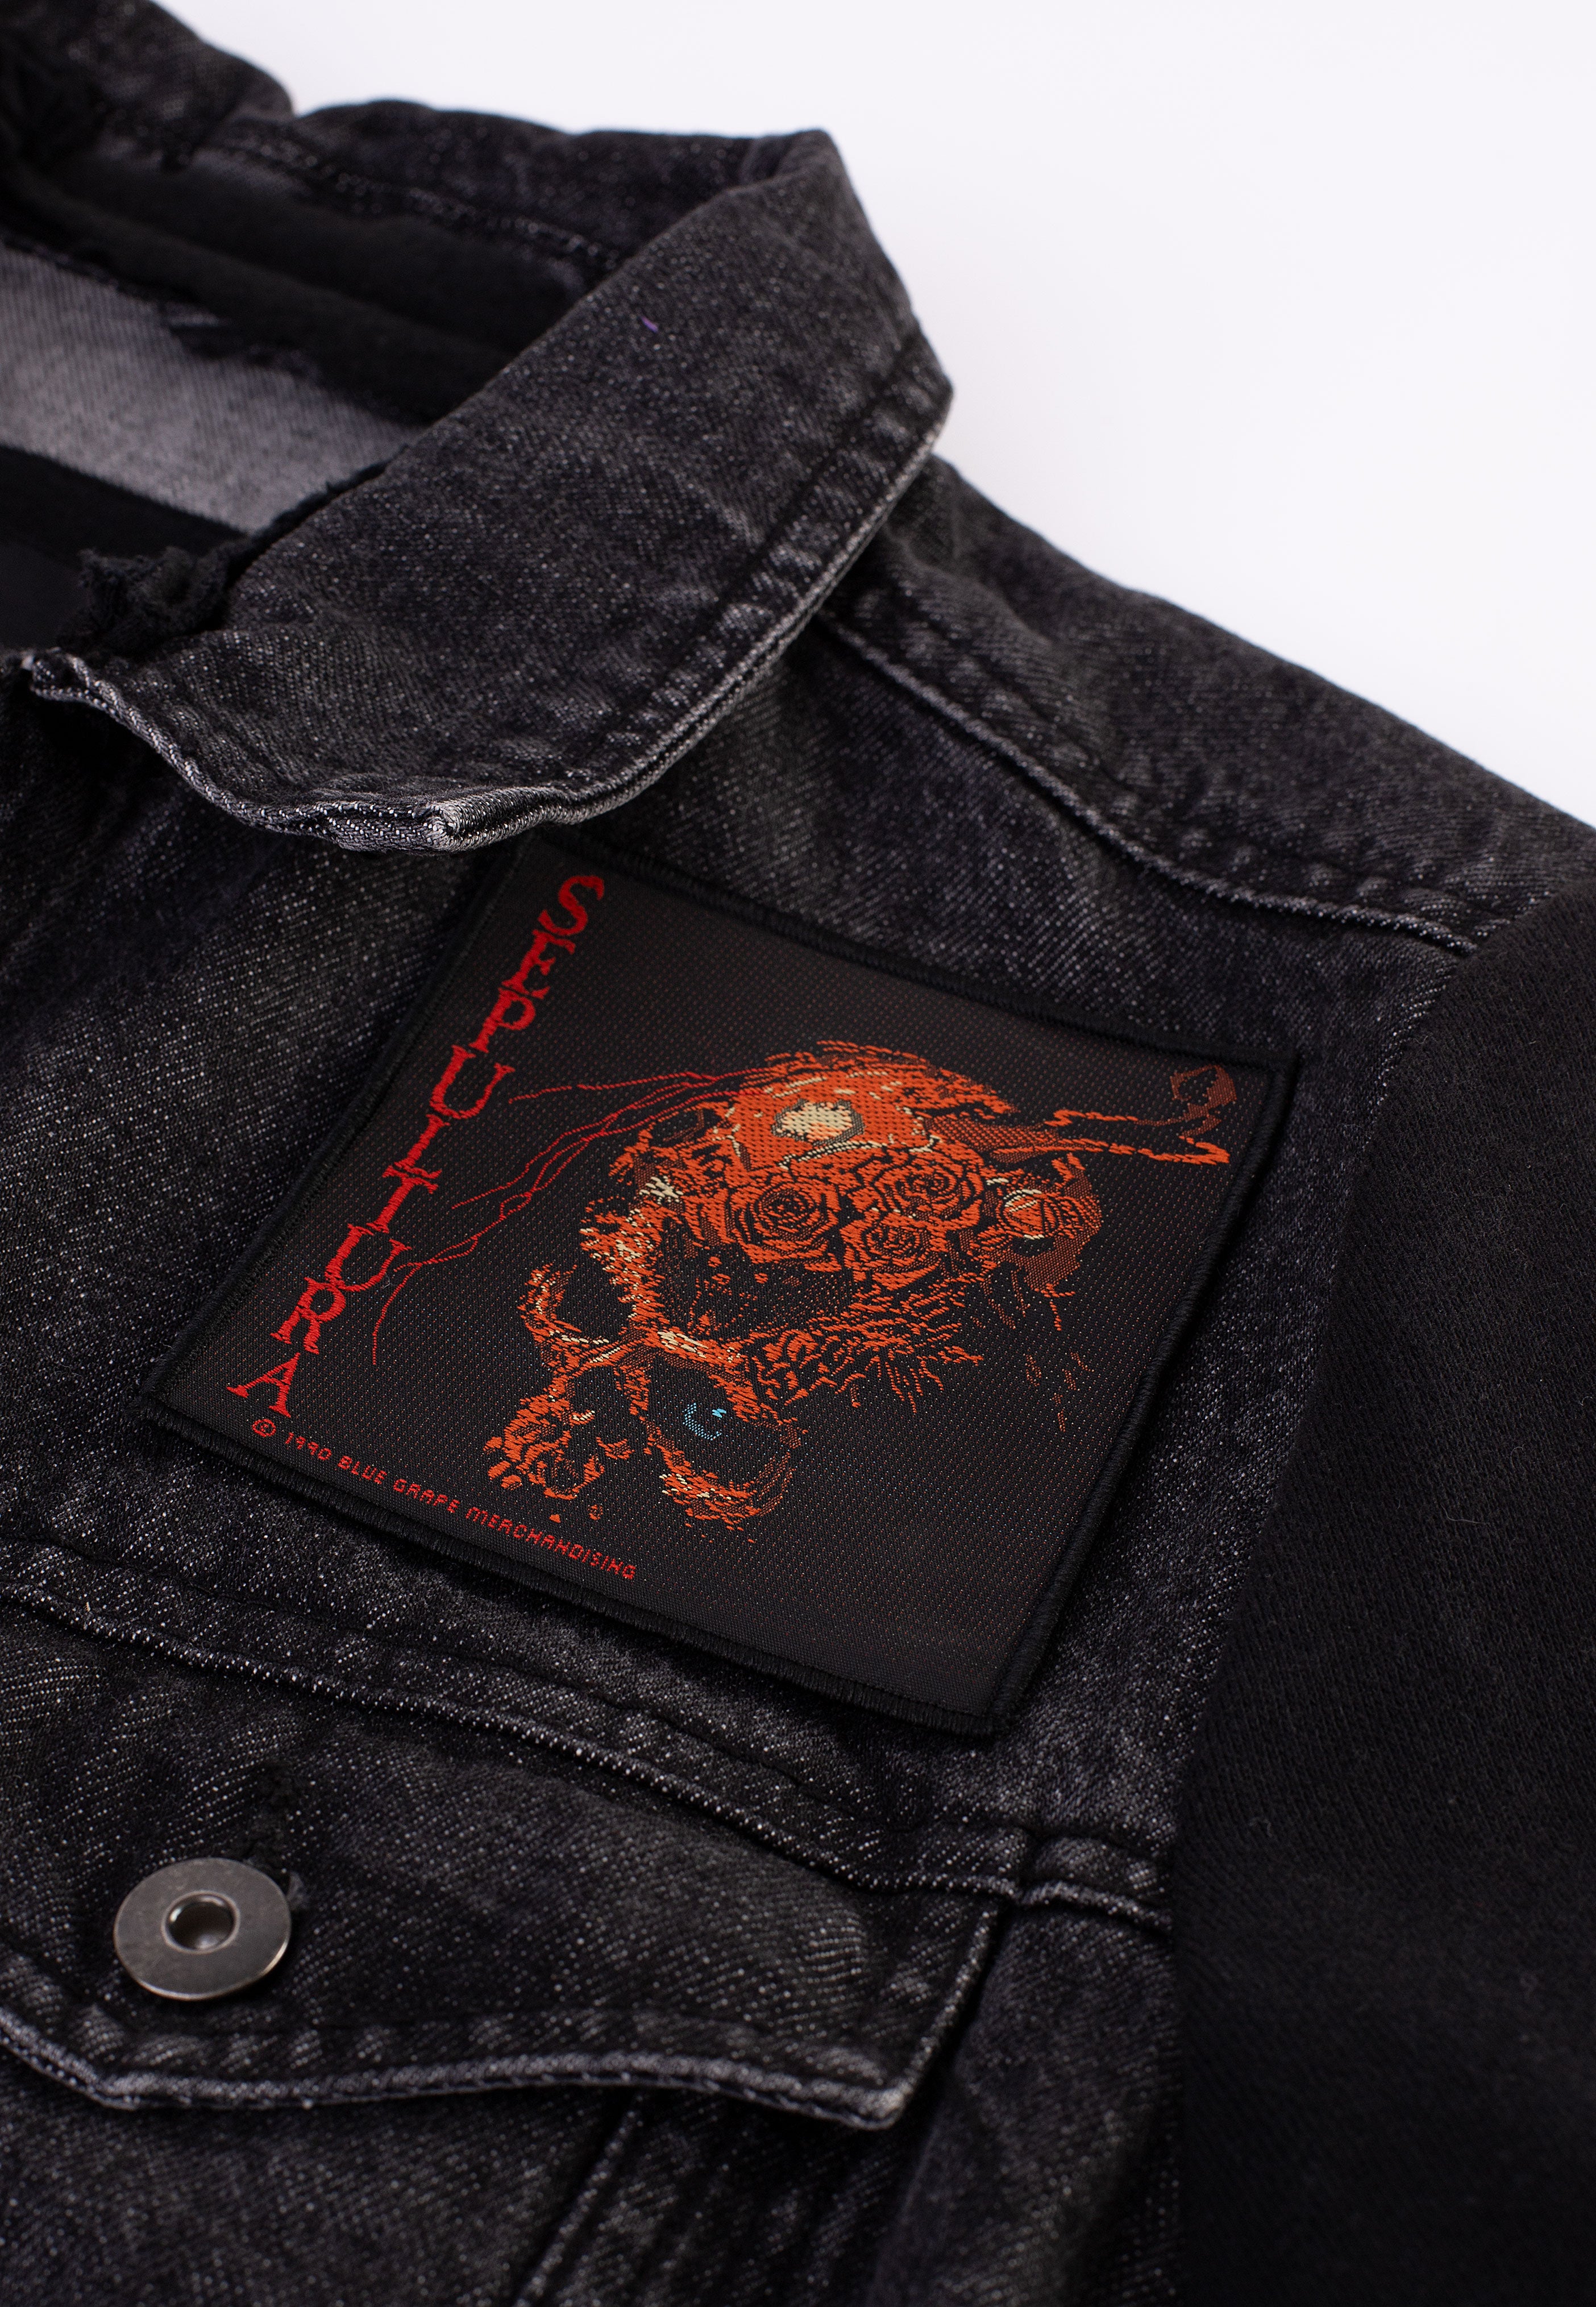 Sepultura - Beneath The Remains - Patch